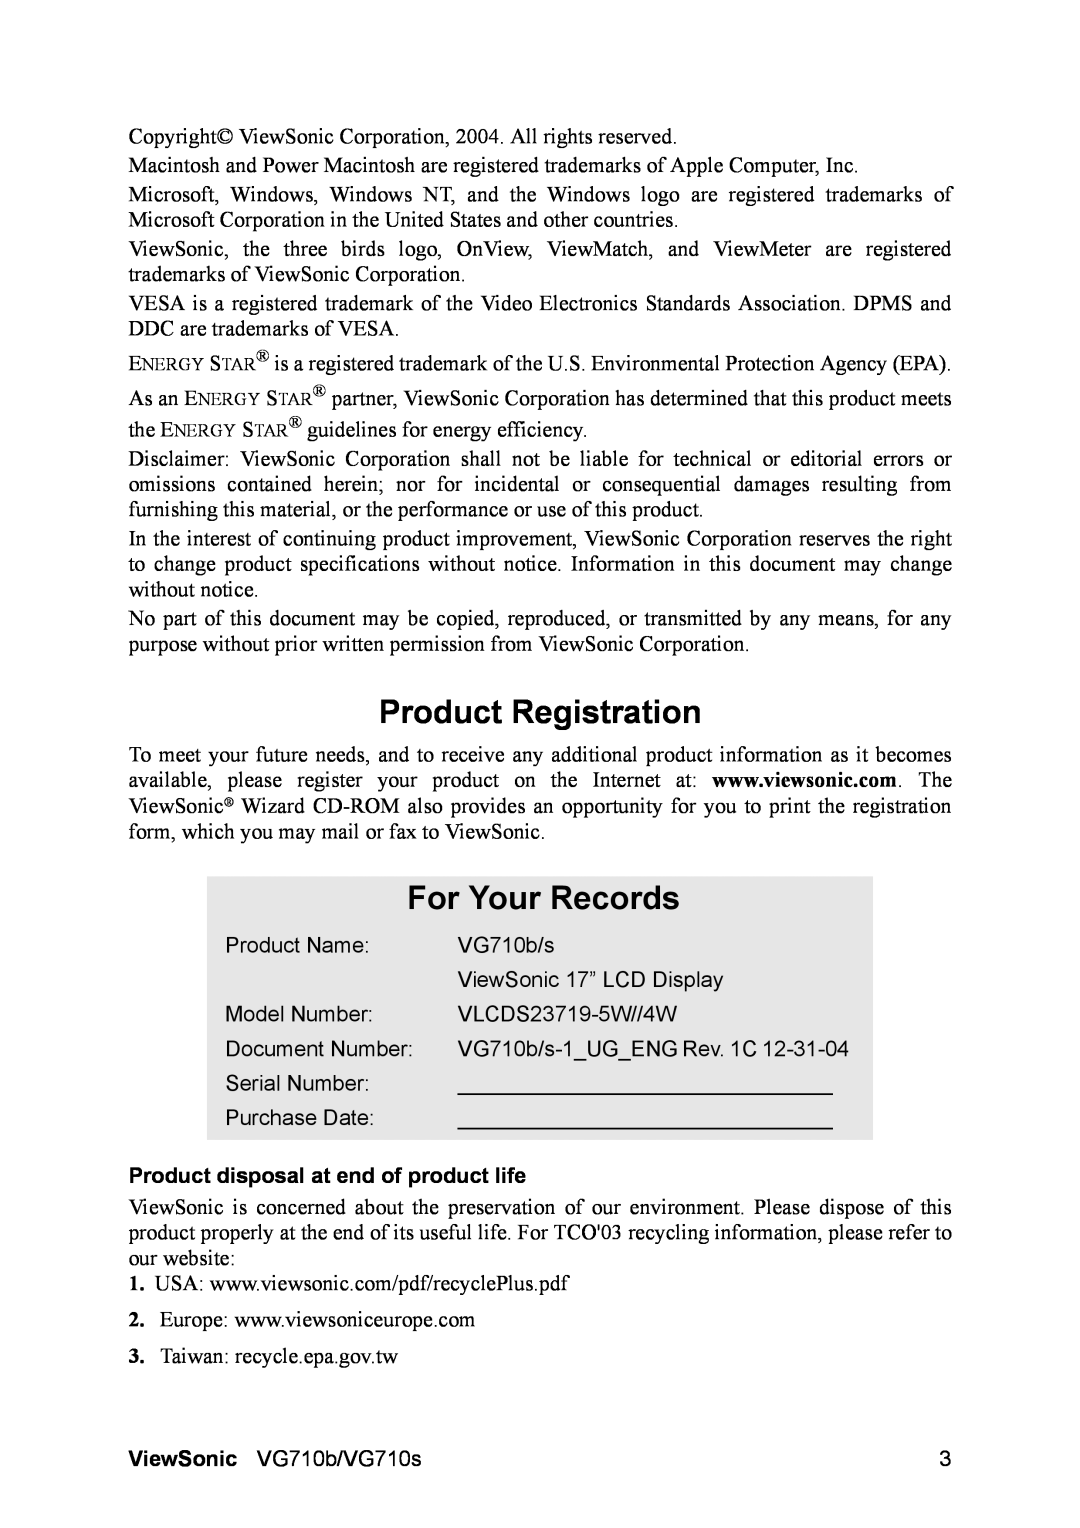 ViewSonic VG710b, VG710S manual Product Registration, For Your Records, Product disposal at end of product life 